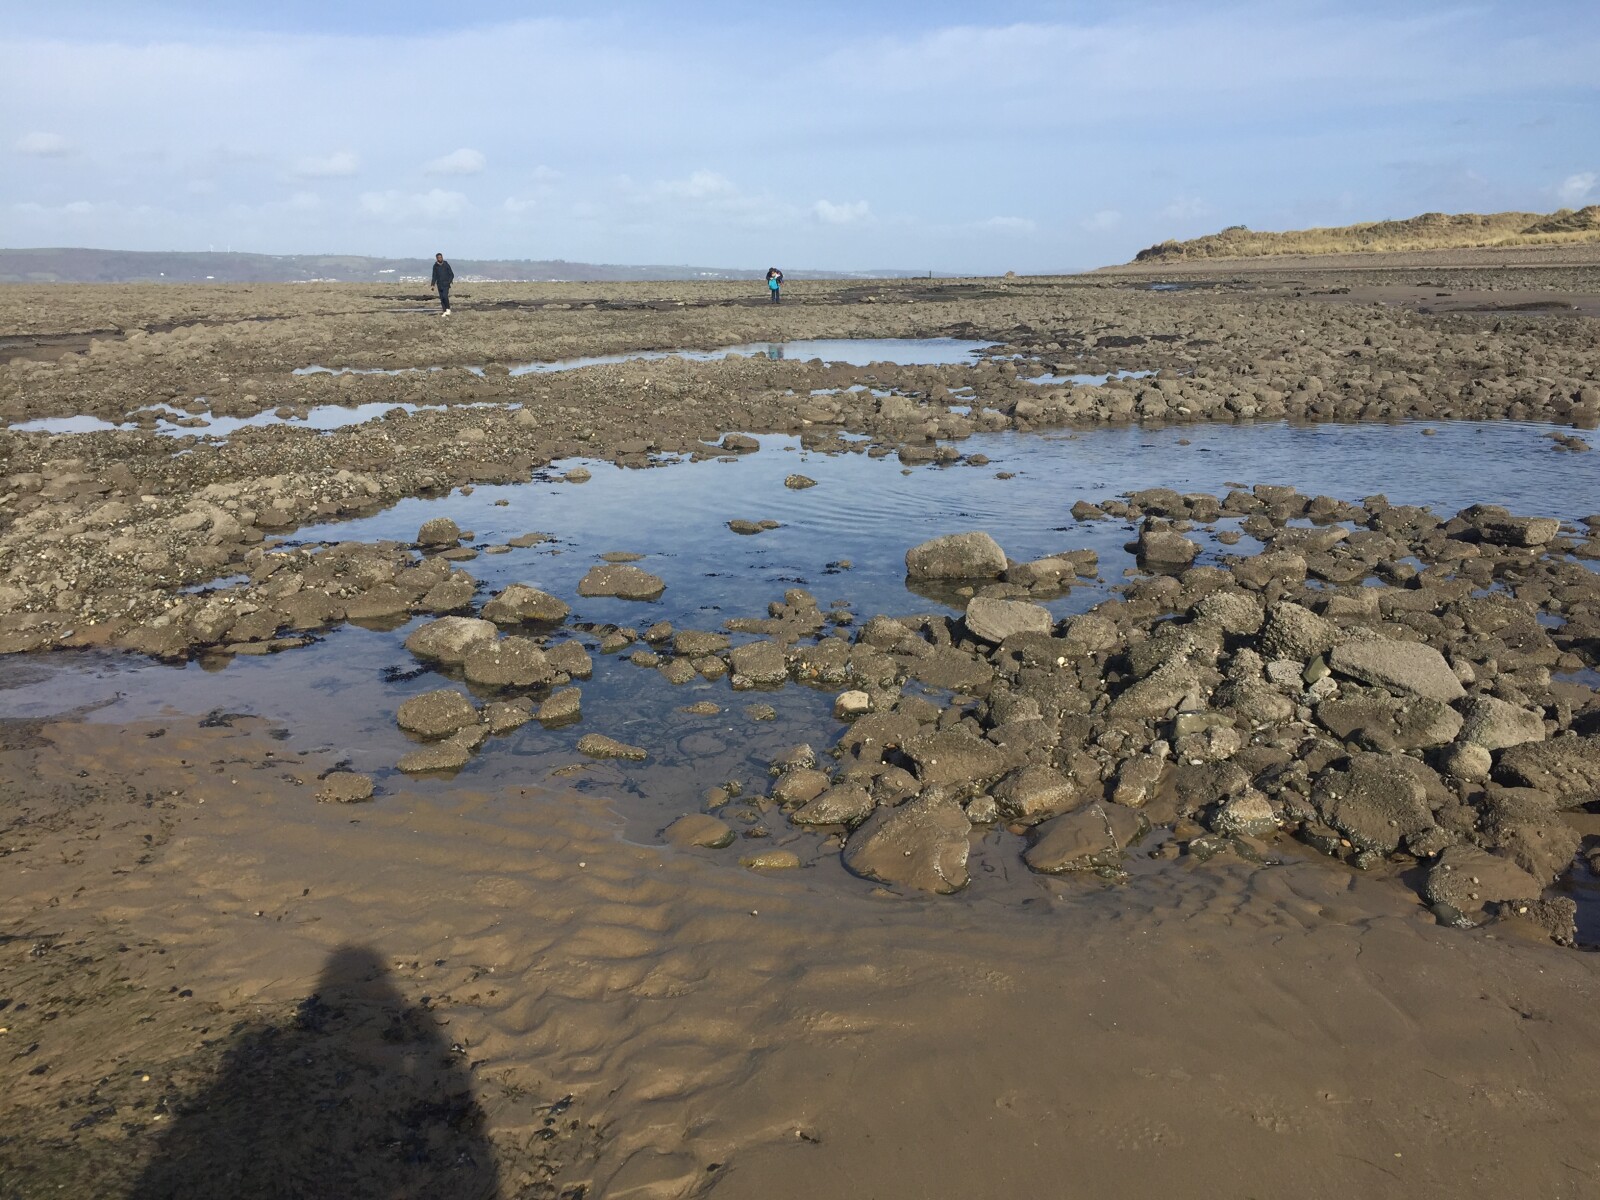 The images shows a beach on a spring day. It is a rocky beach which dates back to the mesolithic era.